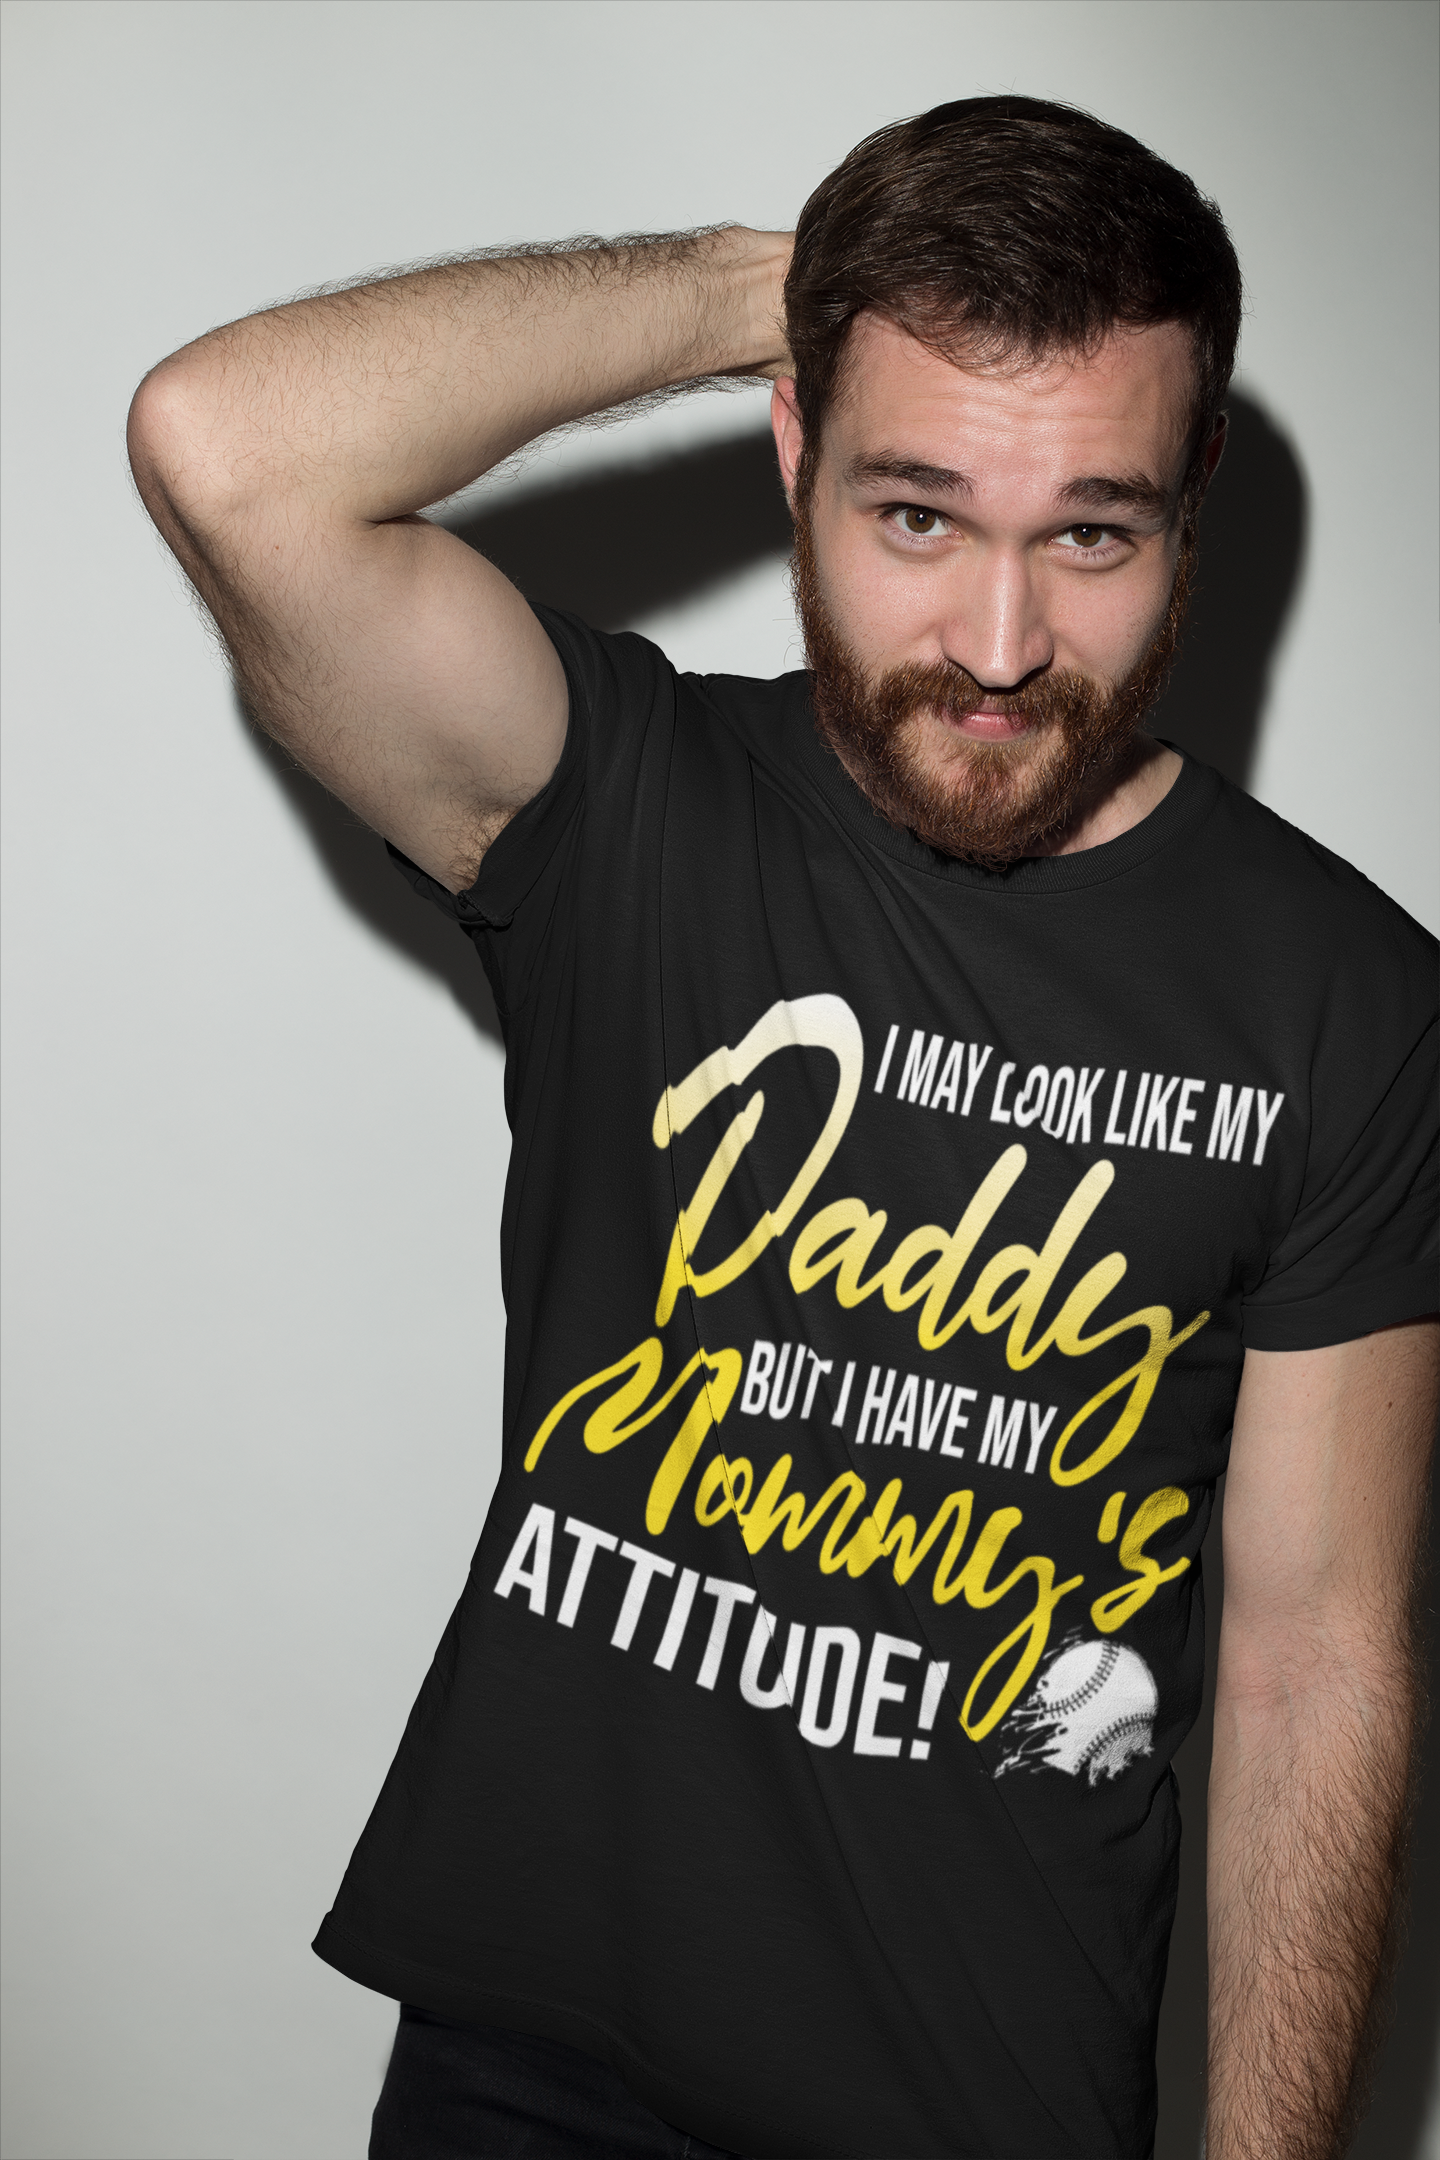 ULTRABASIC Men's Graphic T-Shirt I Have Mommy's Attitude - Parenting Life - Funny Shirt